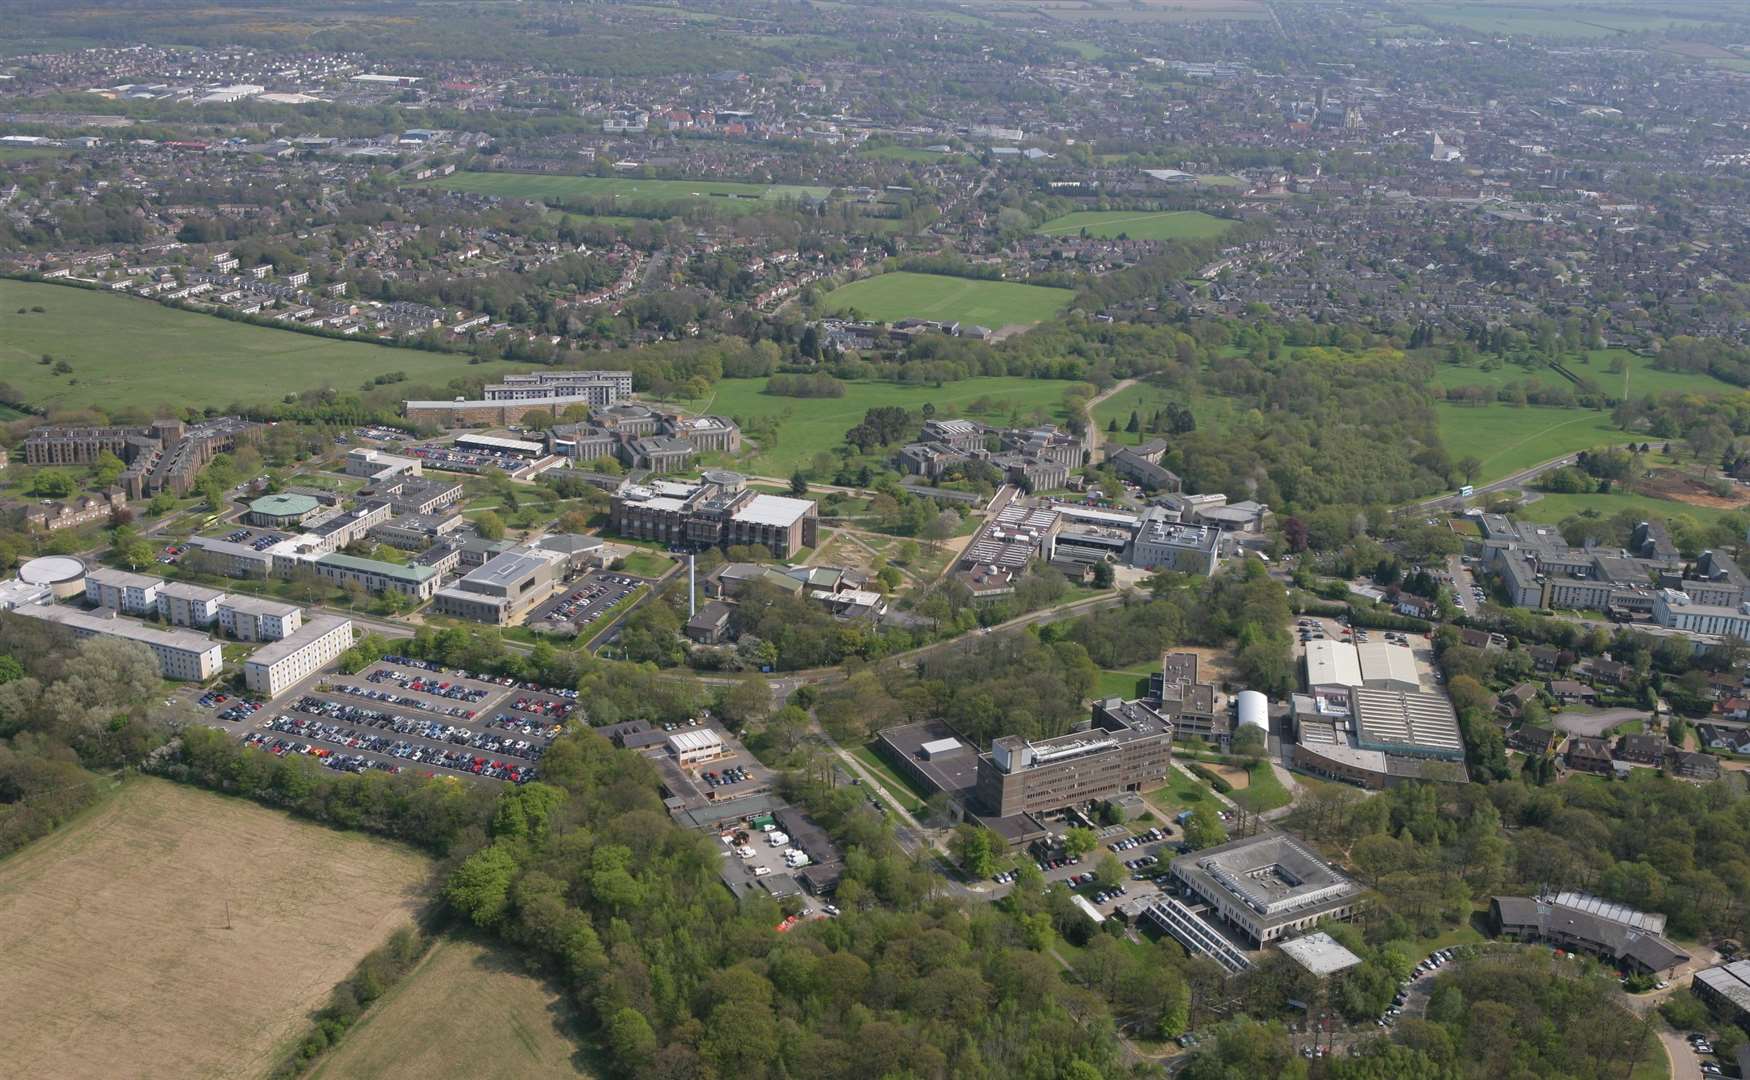 The University of Kent (pictured) recorded 153 new Covid cases in the last seven days